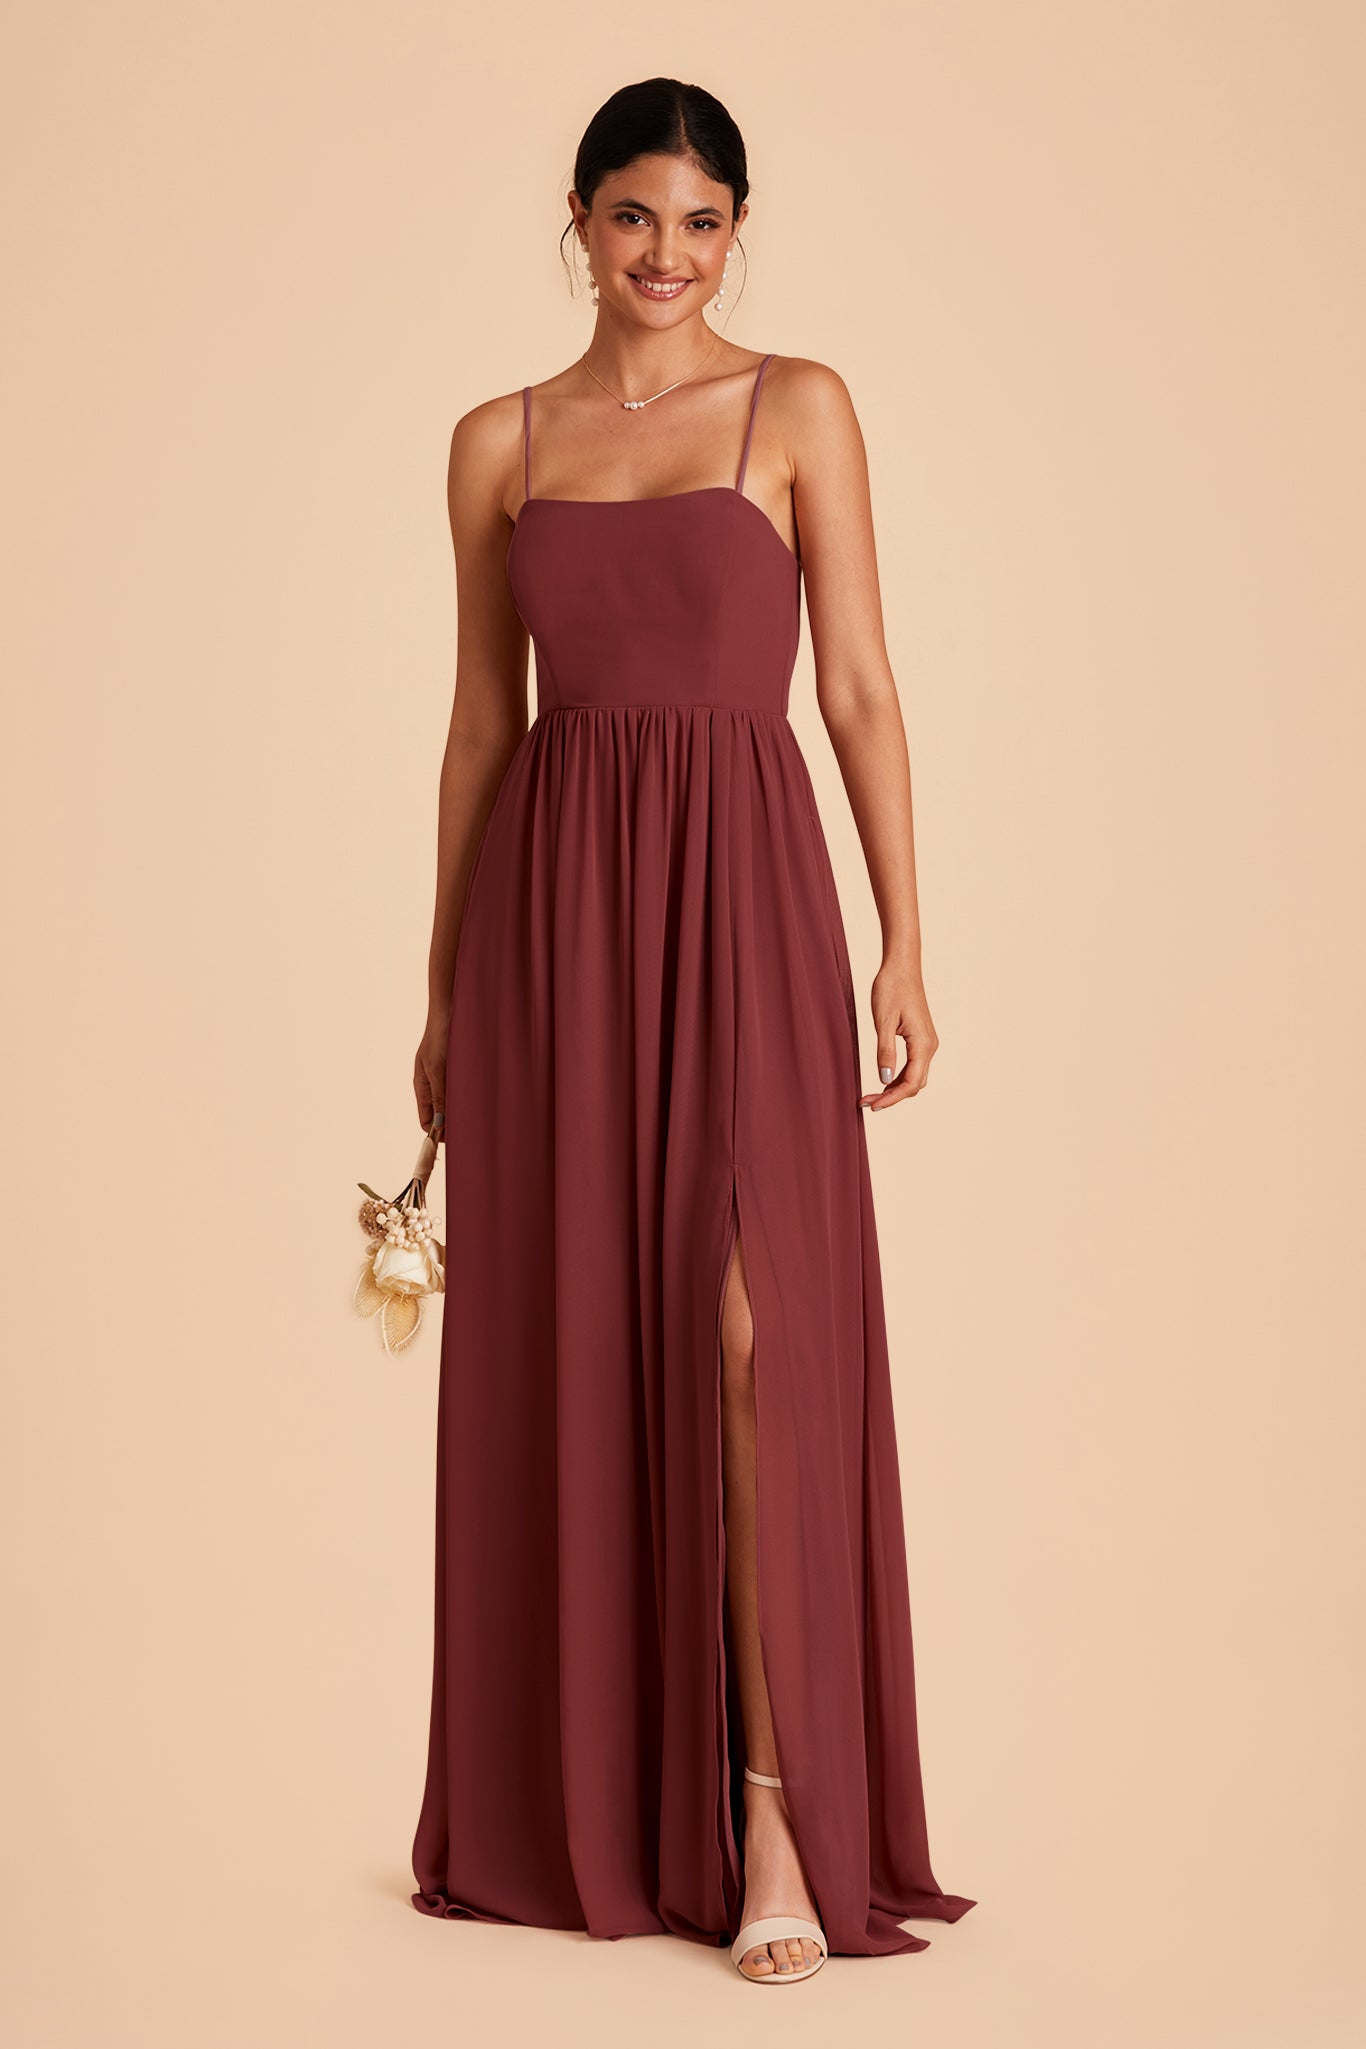 August bridesmaid dress with slit in rosewood chiffon by Birdy Grey, front view